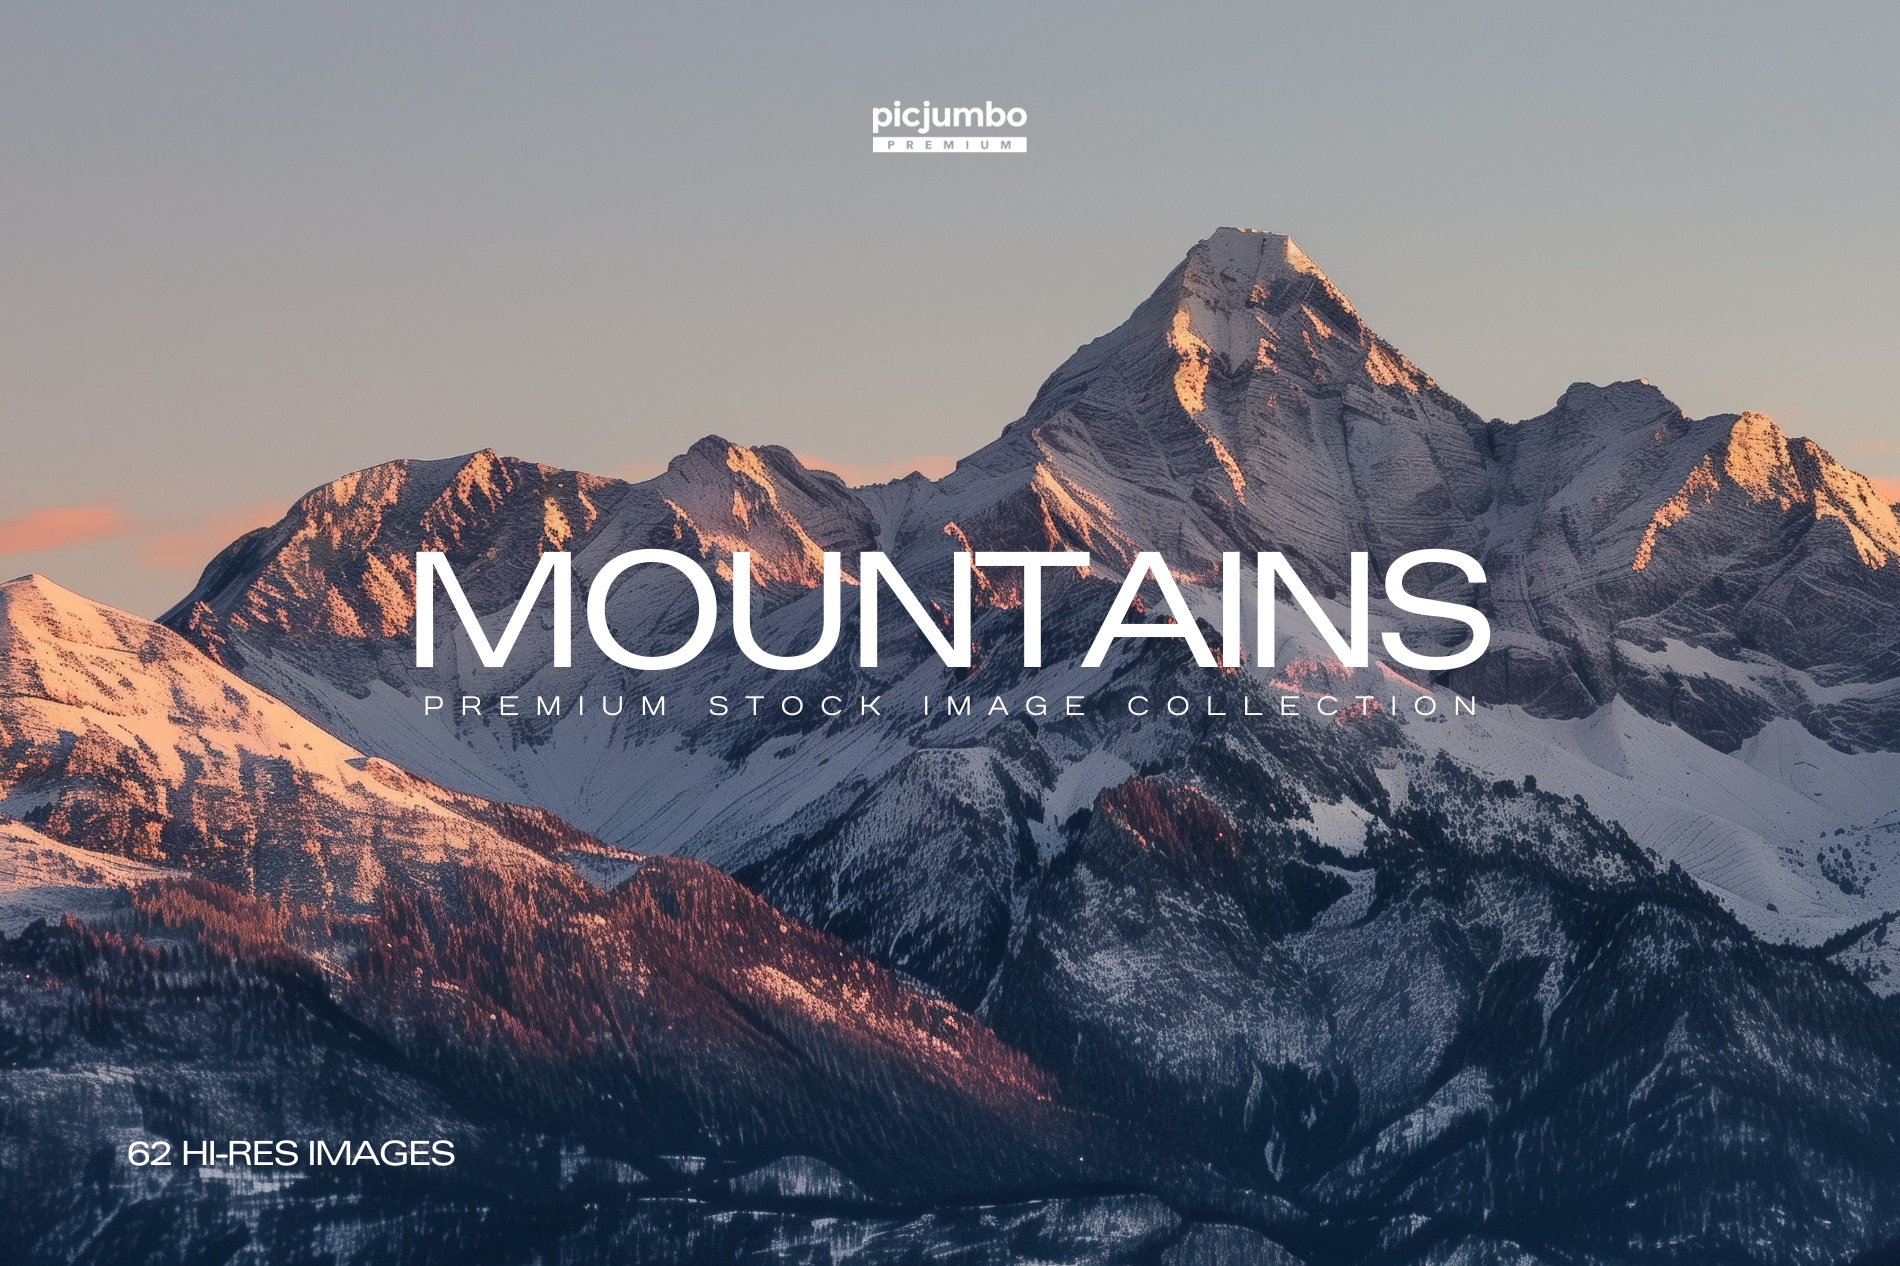 Download hi-res stock photos from our Mountains PREMIUM Collection!